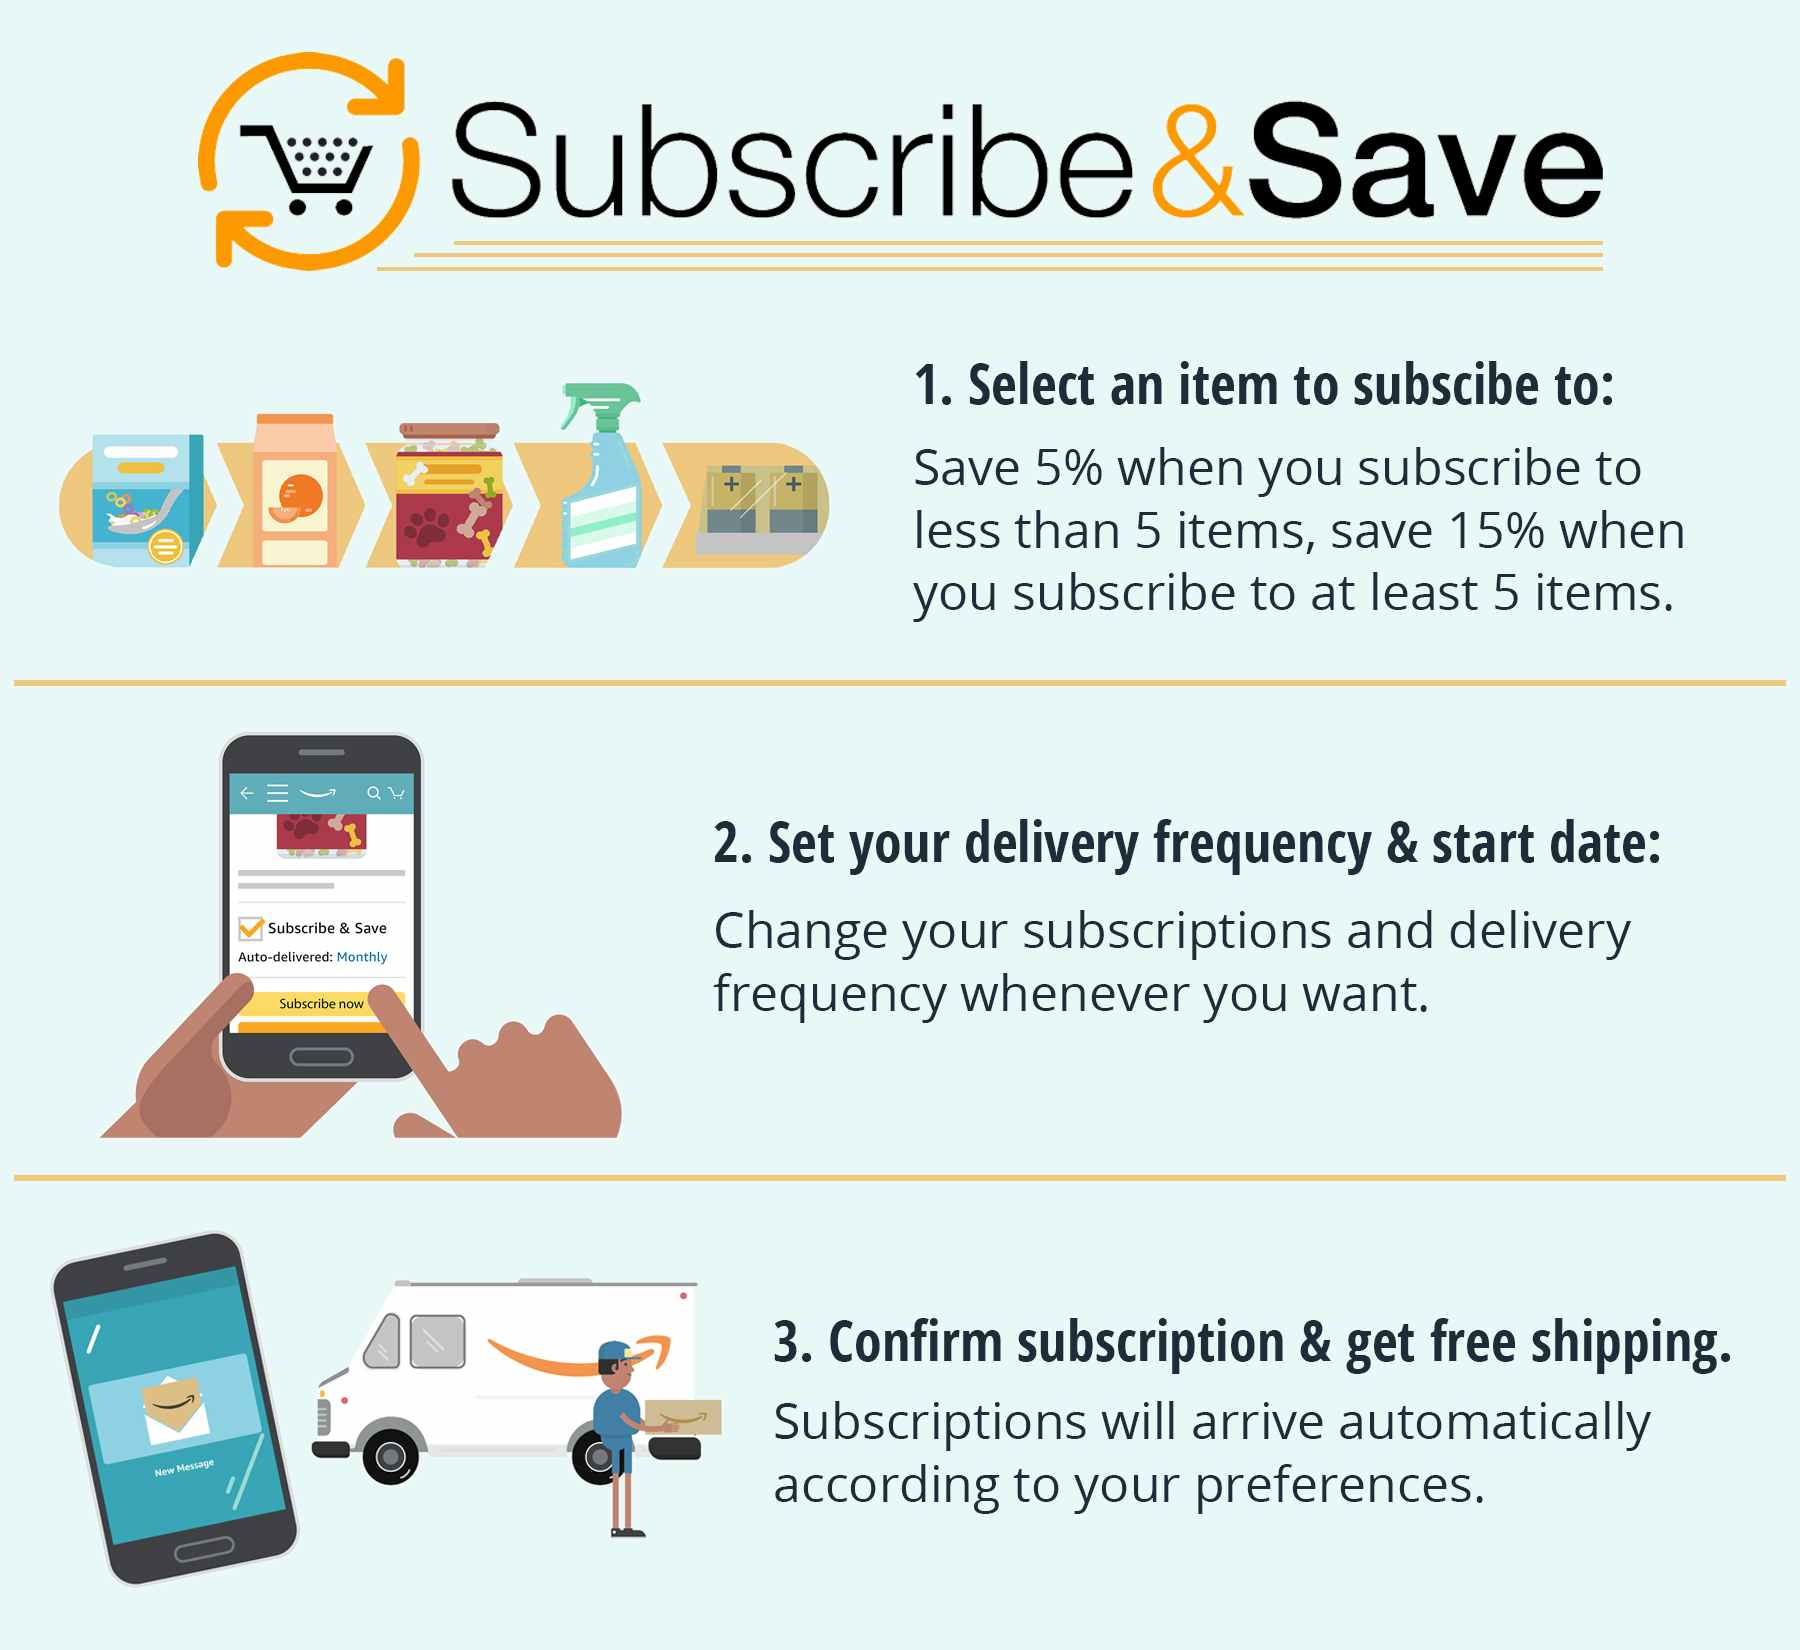 Amazon subscribe and save how it works graphic.